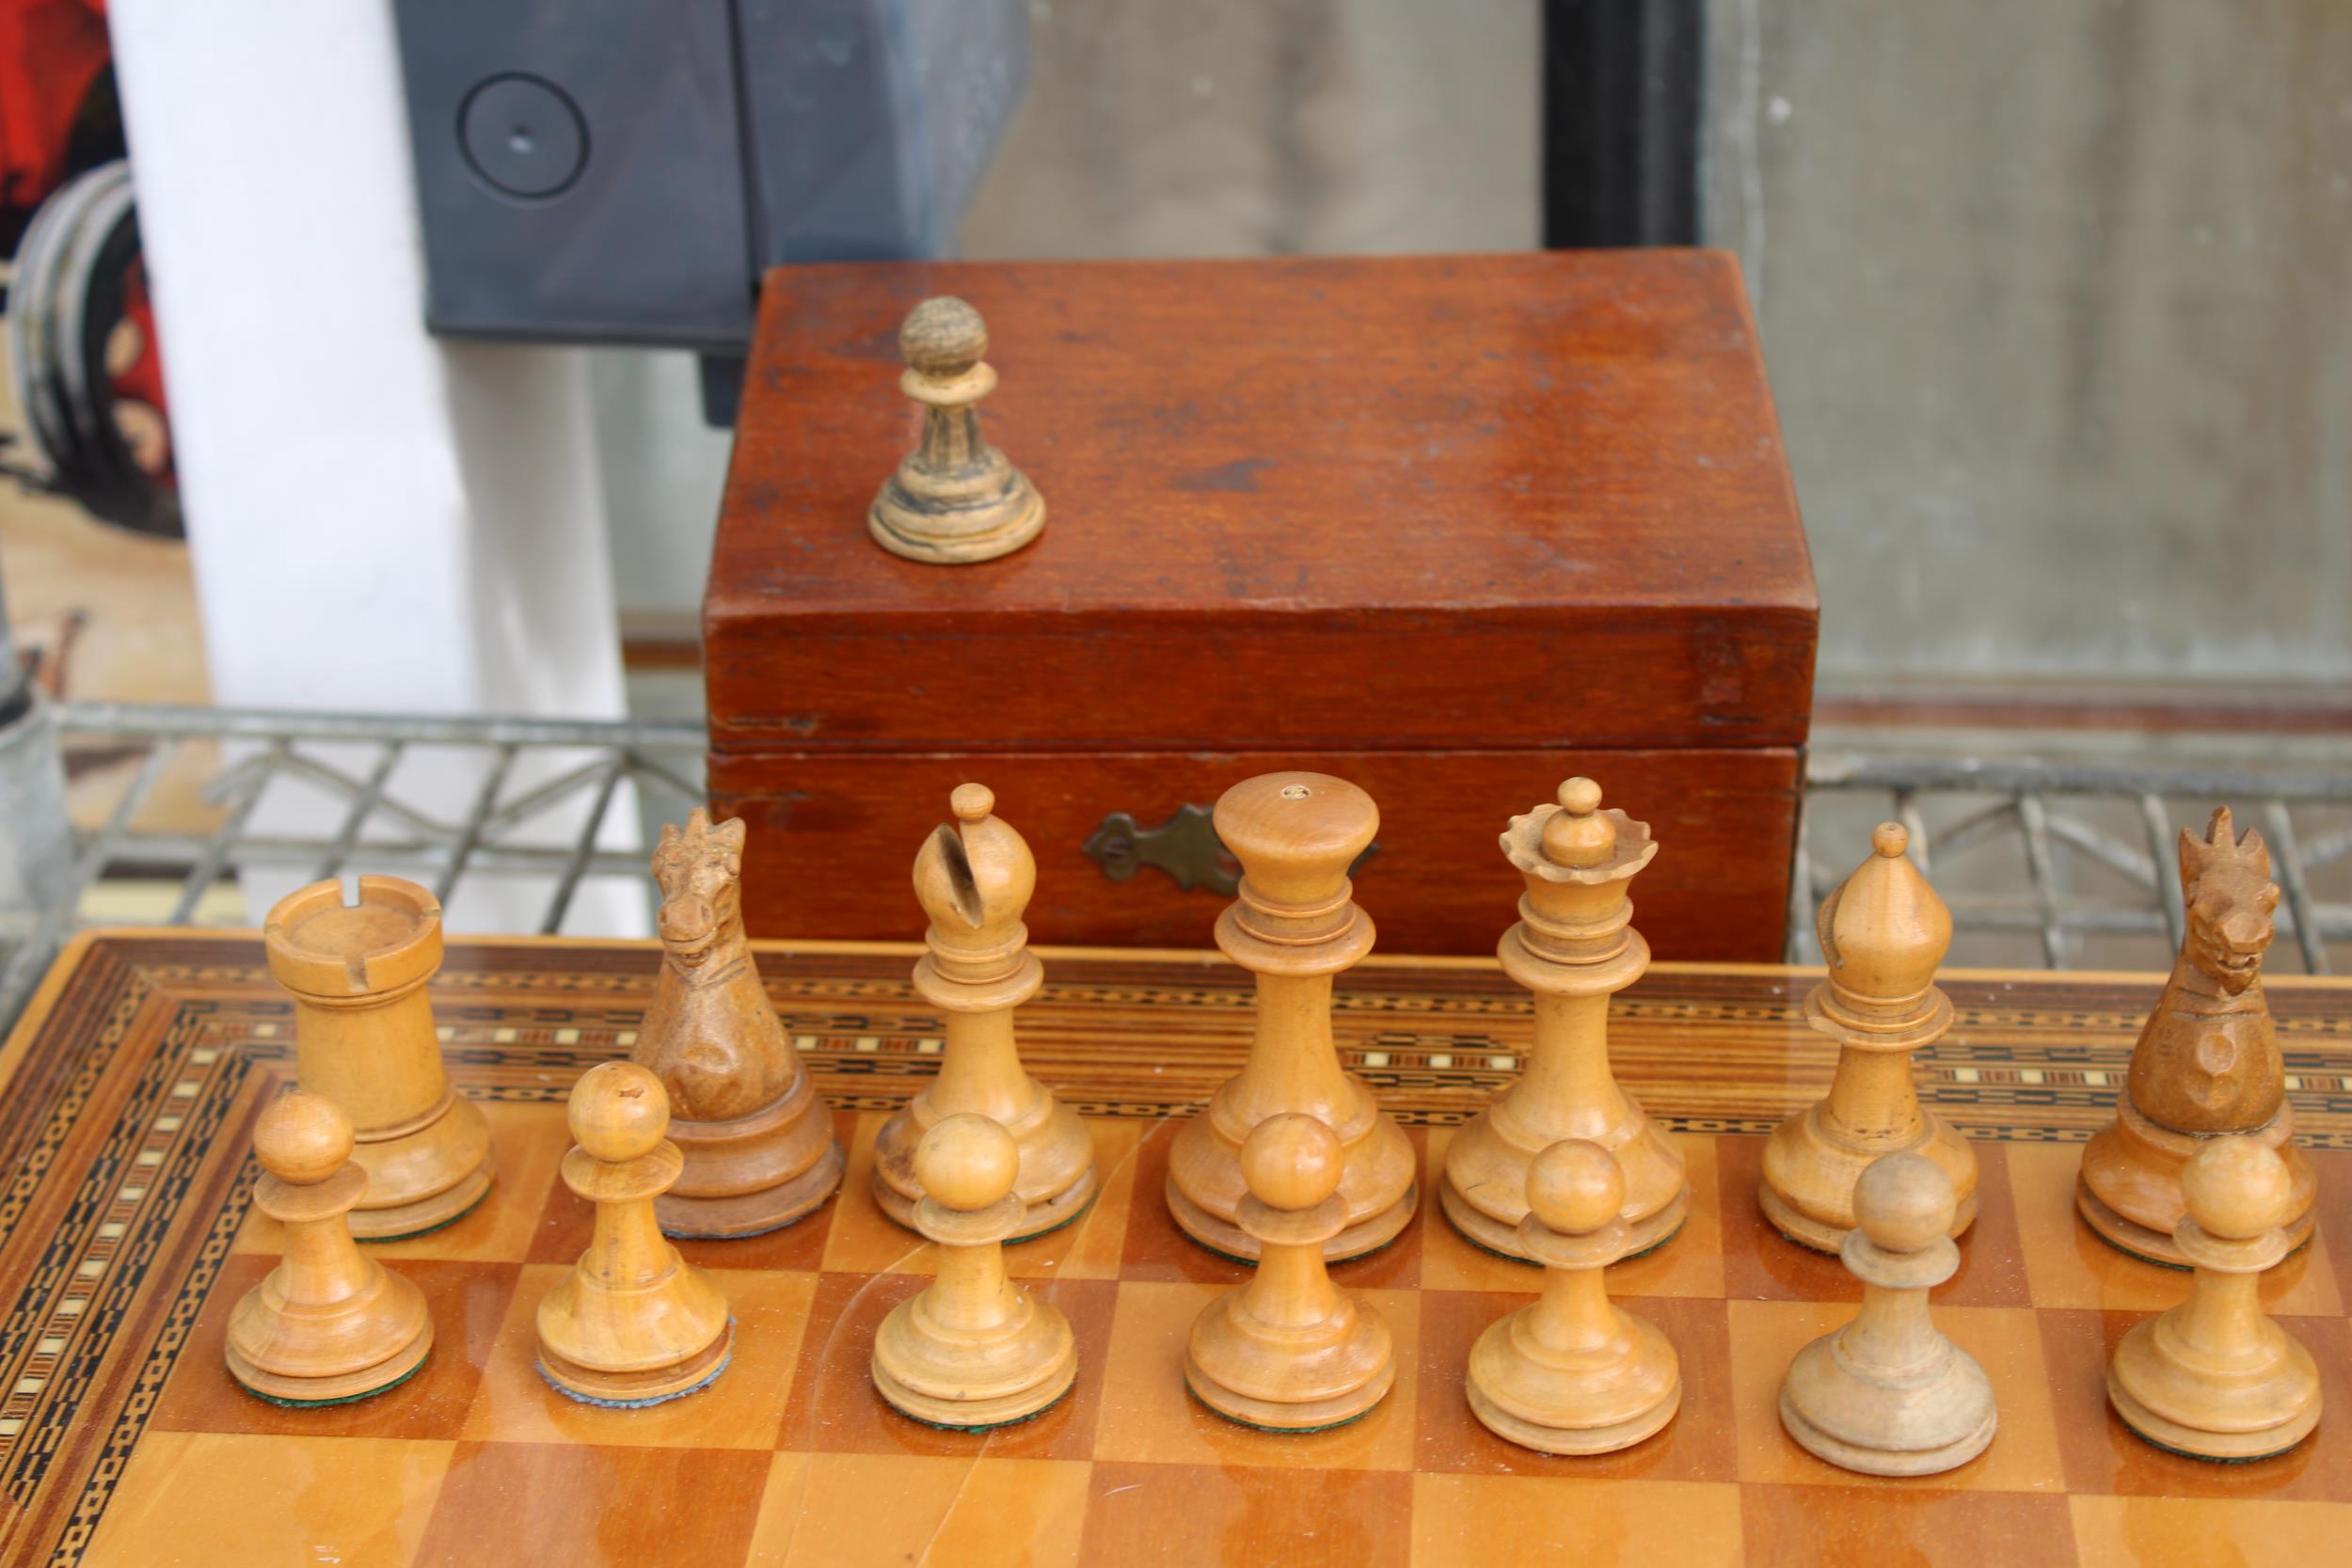 A VINTAGE CHESS BOARD WITH A CHESS SET (ONE PIECE IS A REPLACEMENT) - Image 2 of 3